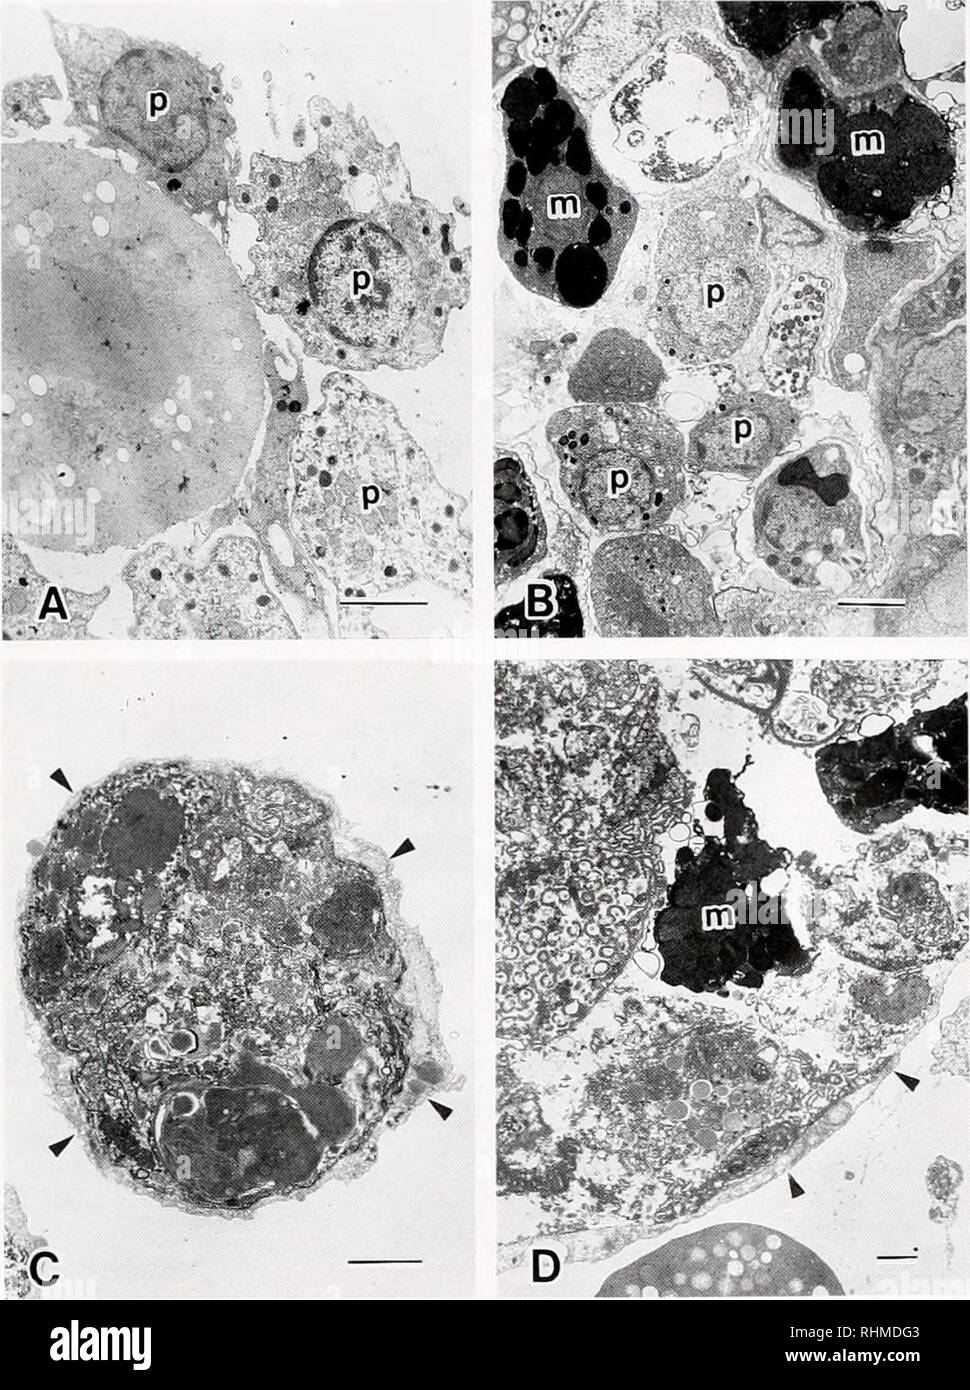 . The Biological bulletin. Biology; Zoology; Biology; Marine Biology. HEMOCYTE BEHAVIOR IN ASCIDIAN ALLOREJECTION 191. Figure 4. Hemocytes in allorejection reaction in Botiyllus scalaris. (A) Several phagocytes adhere to a hemocyte. (B) Aggregation. (C) Phagocytosis. Arrowheads indicate outer edges of a phagocyte that surrounded and engulfed a hemocyte cluster. (D) Encapsulation. Arrowheads indicate the periphery of a phagocyte that encapsulated a hemocyte cluster, m, encapsulated and disintegrated morula cell: p. phagocyte. Bars = 2 urn.. Please note that these images are extracted from scann Stock Photo